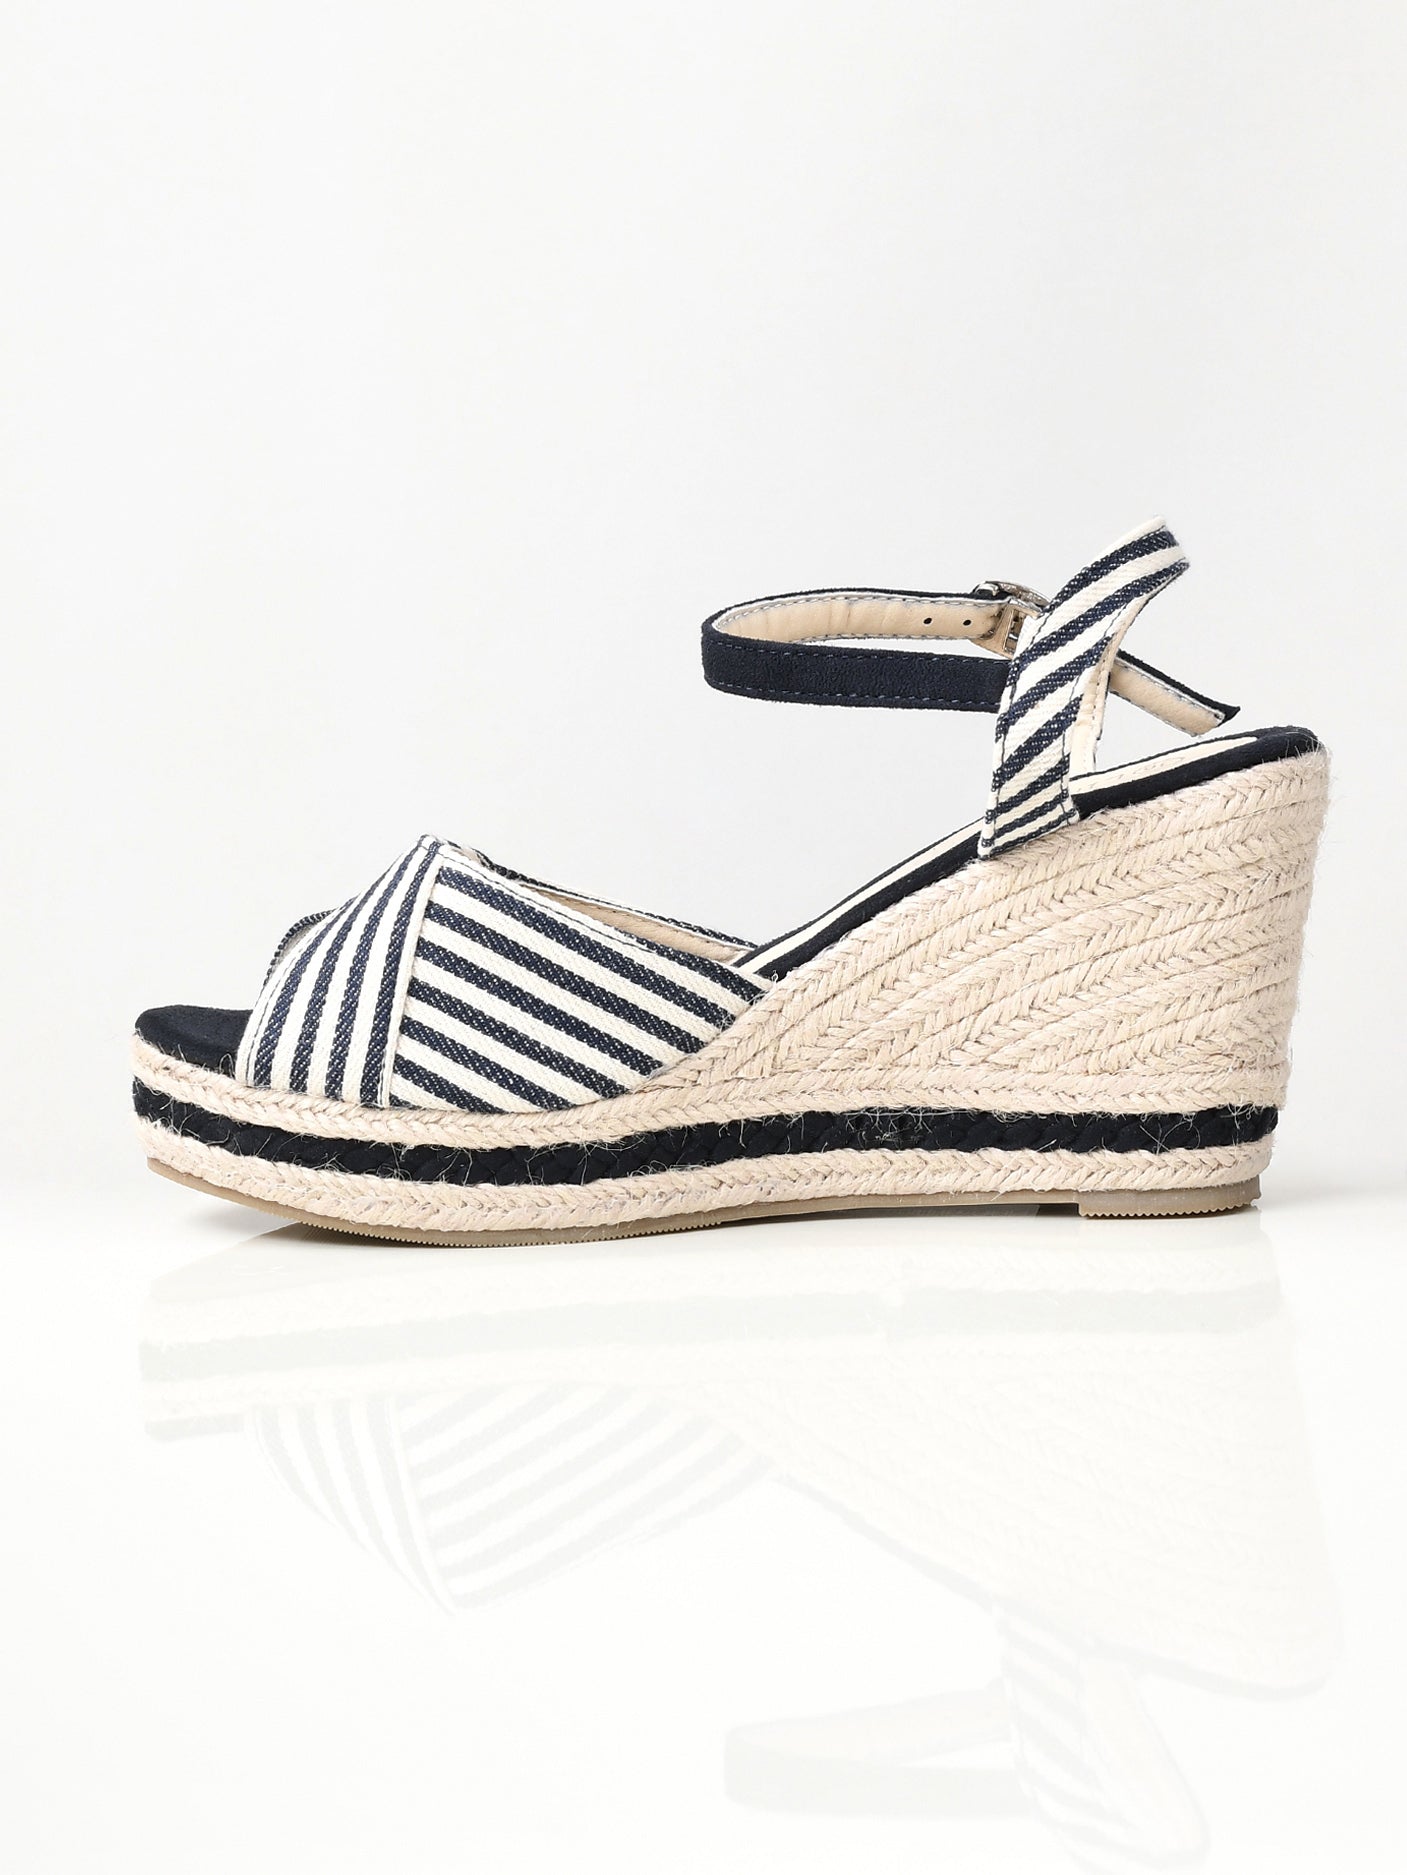 Striped Wedges - Blue